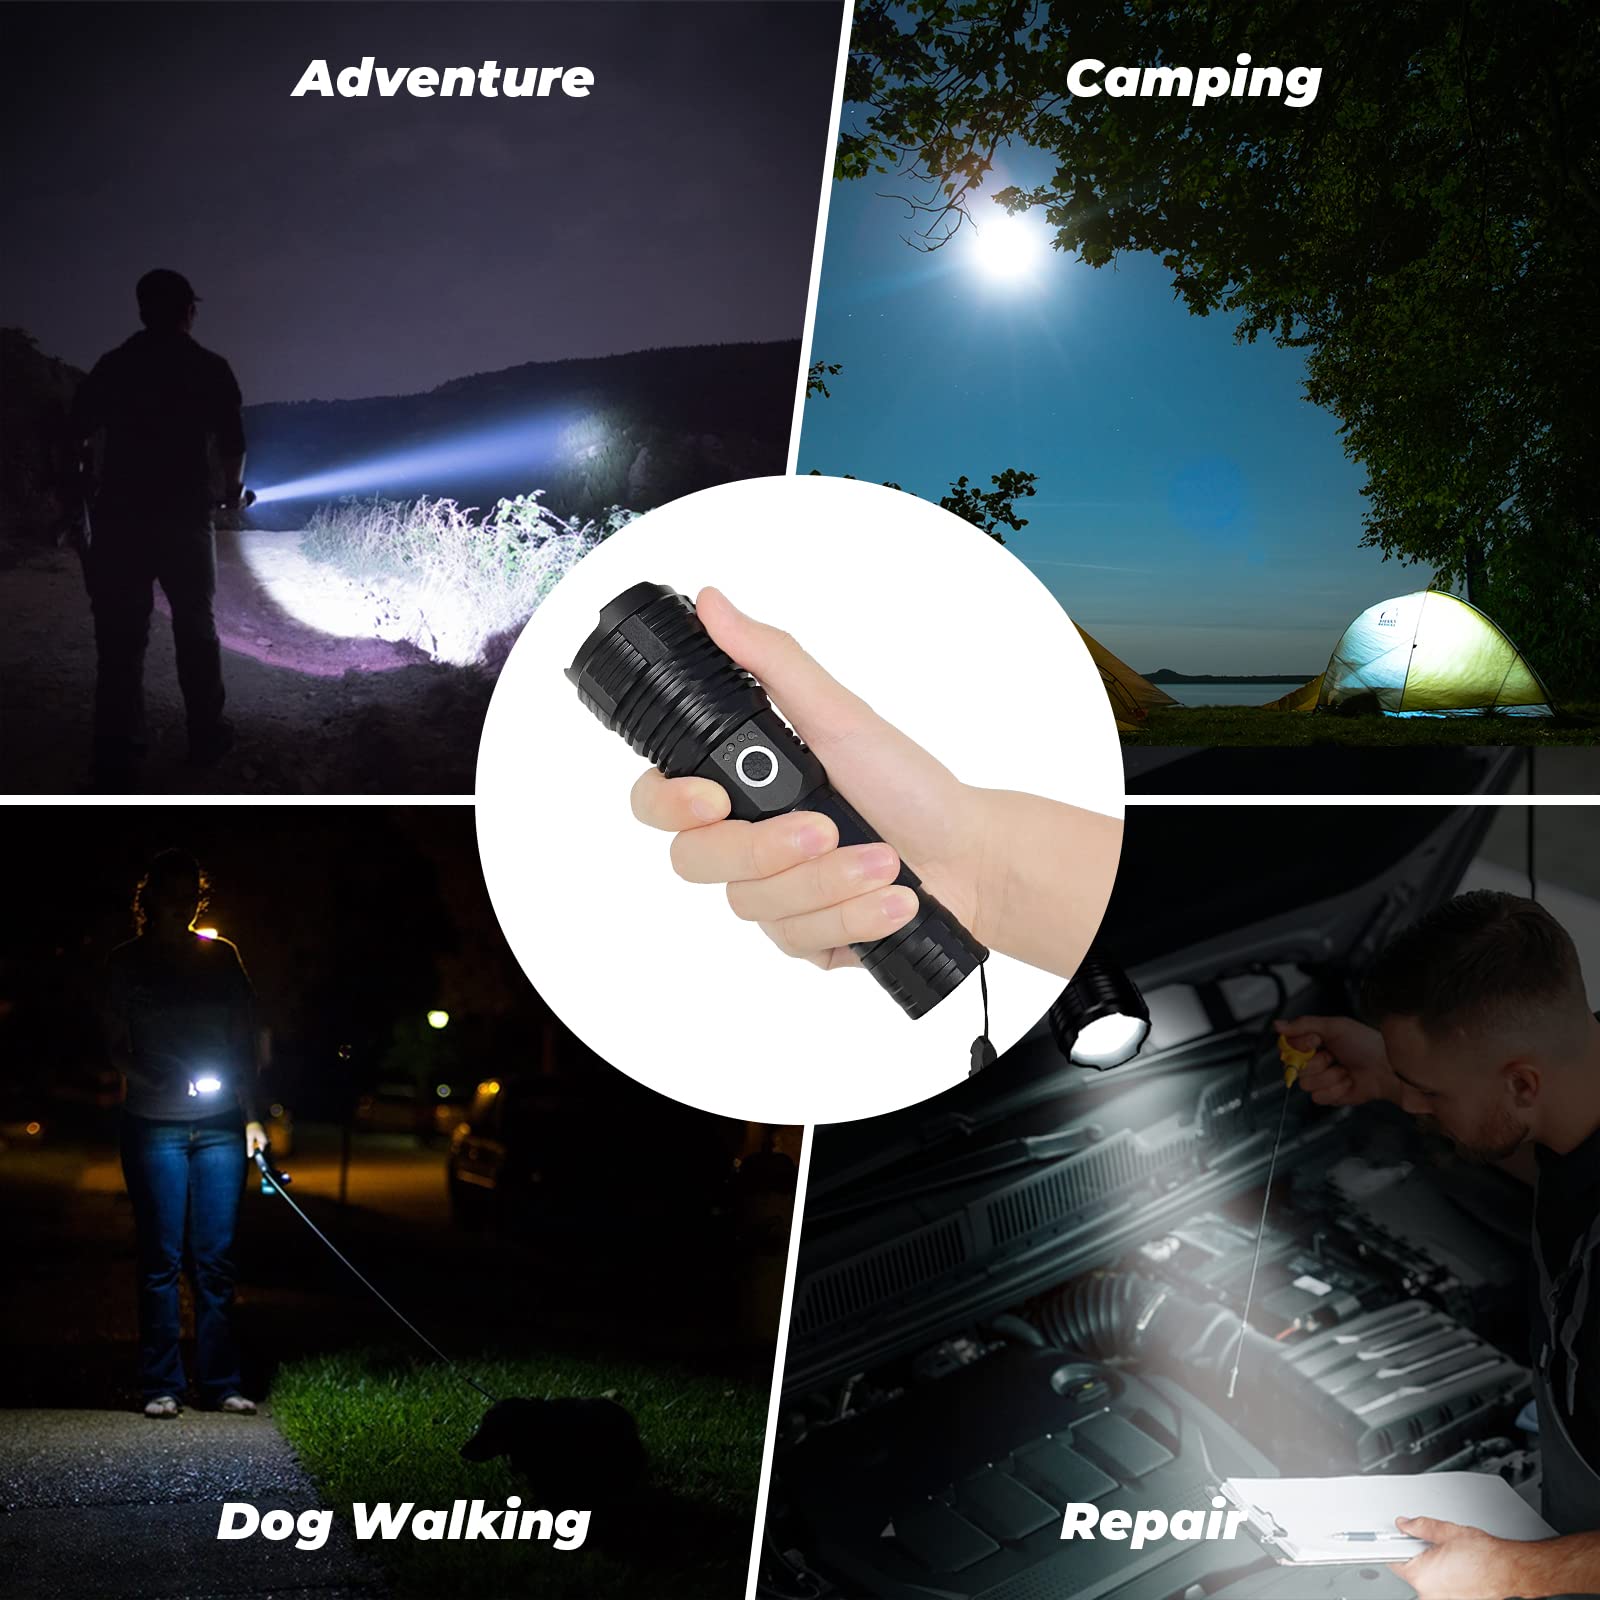 SKNSL Rechargeable LED Flashlight, 250,000 Lumen Super Bright, Waterproof, Adjustable Light Modes, USB Rechargeable, Long Battery Life, IPX6 Waterproof, Ideal for Outdoor Use